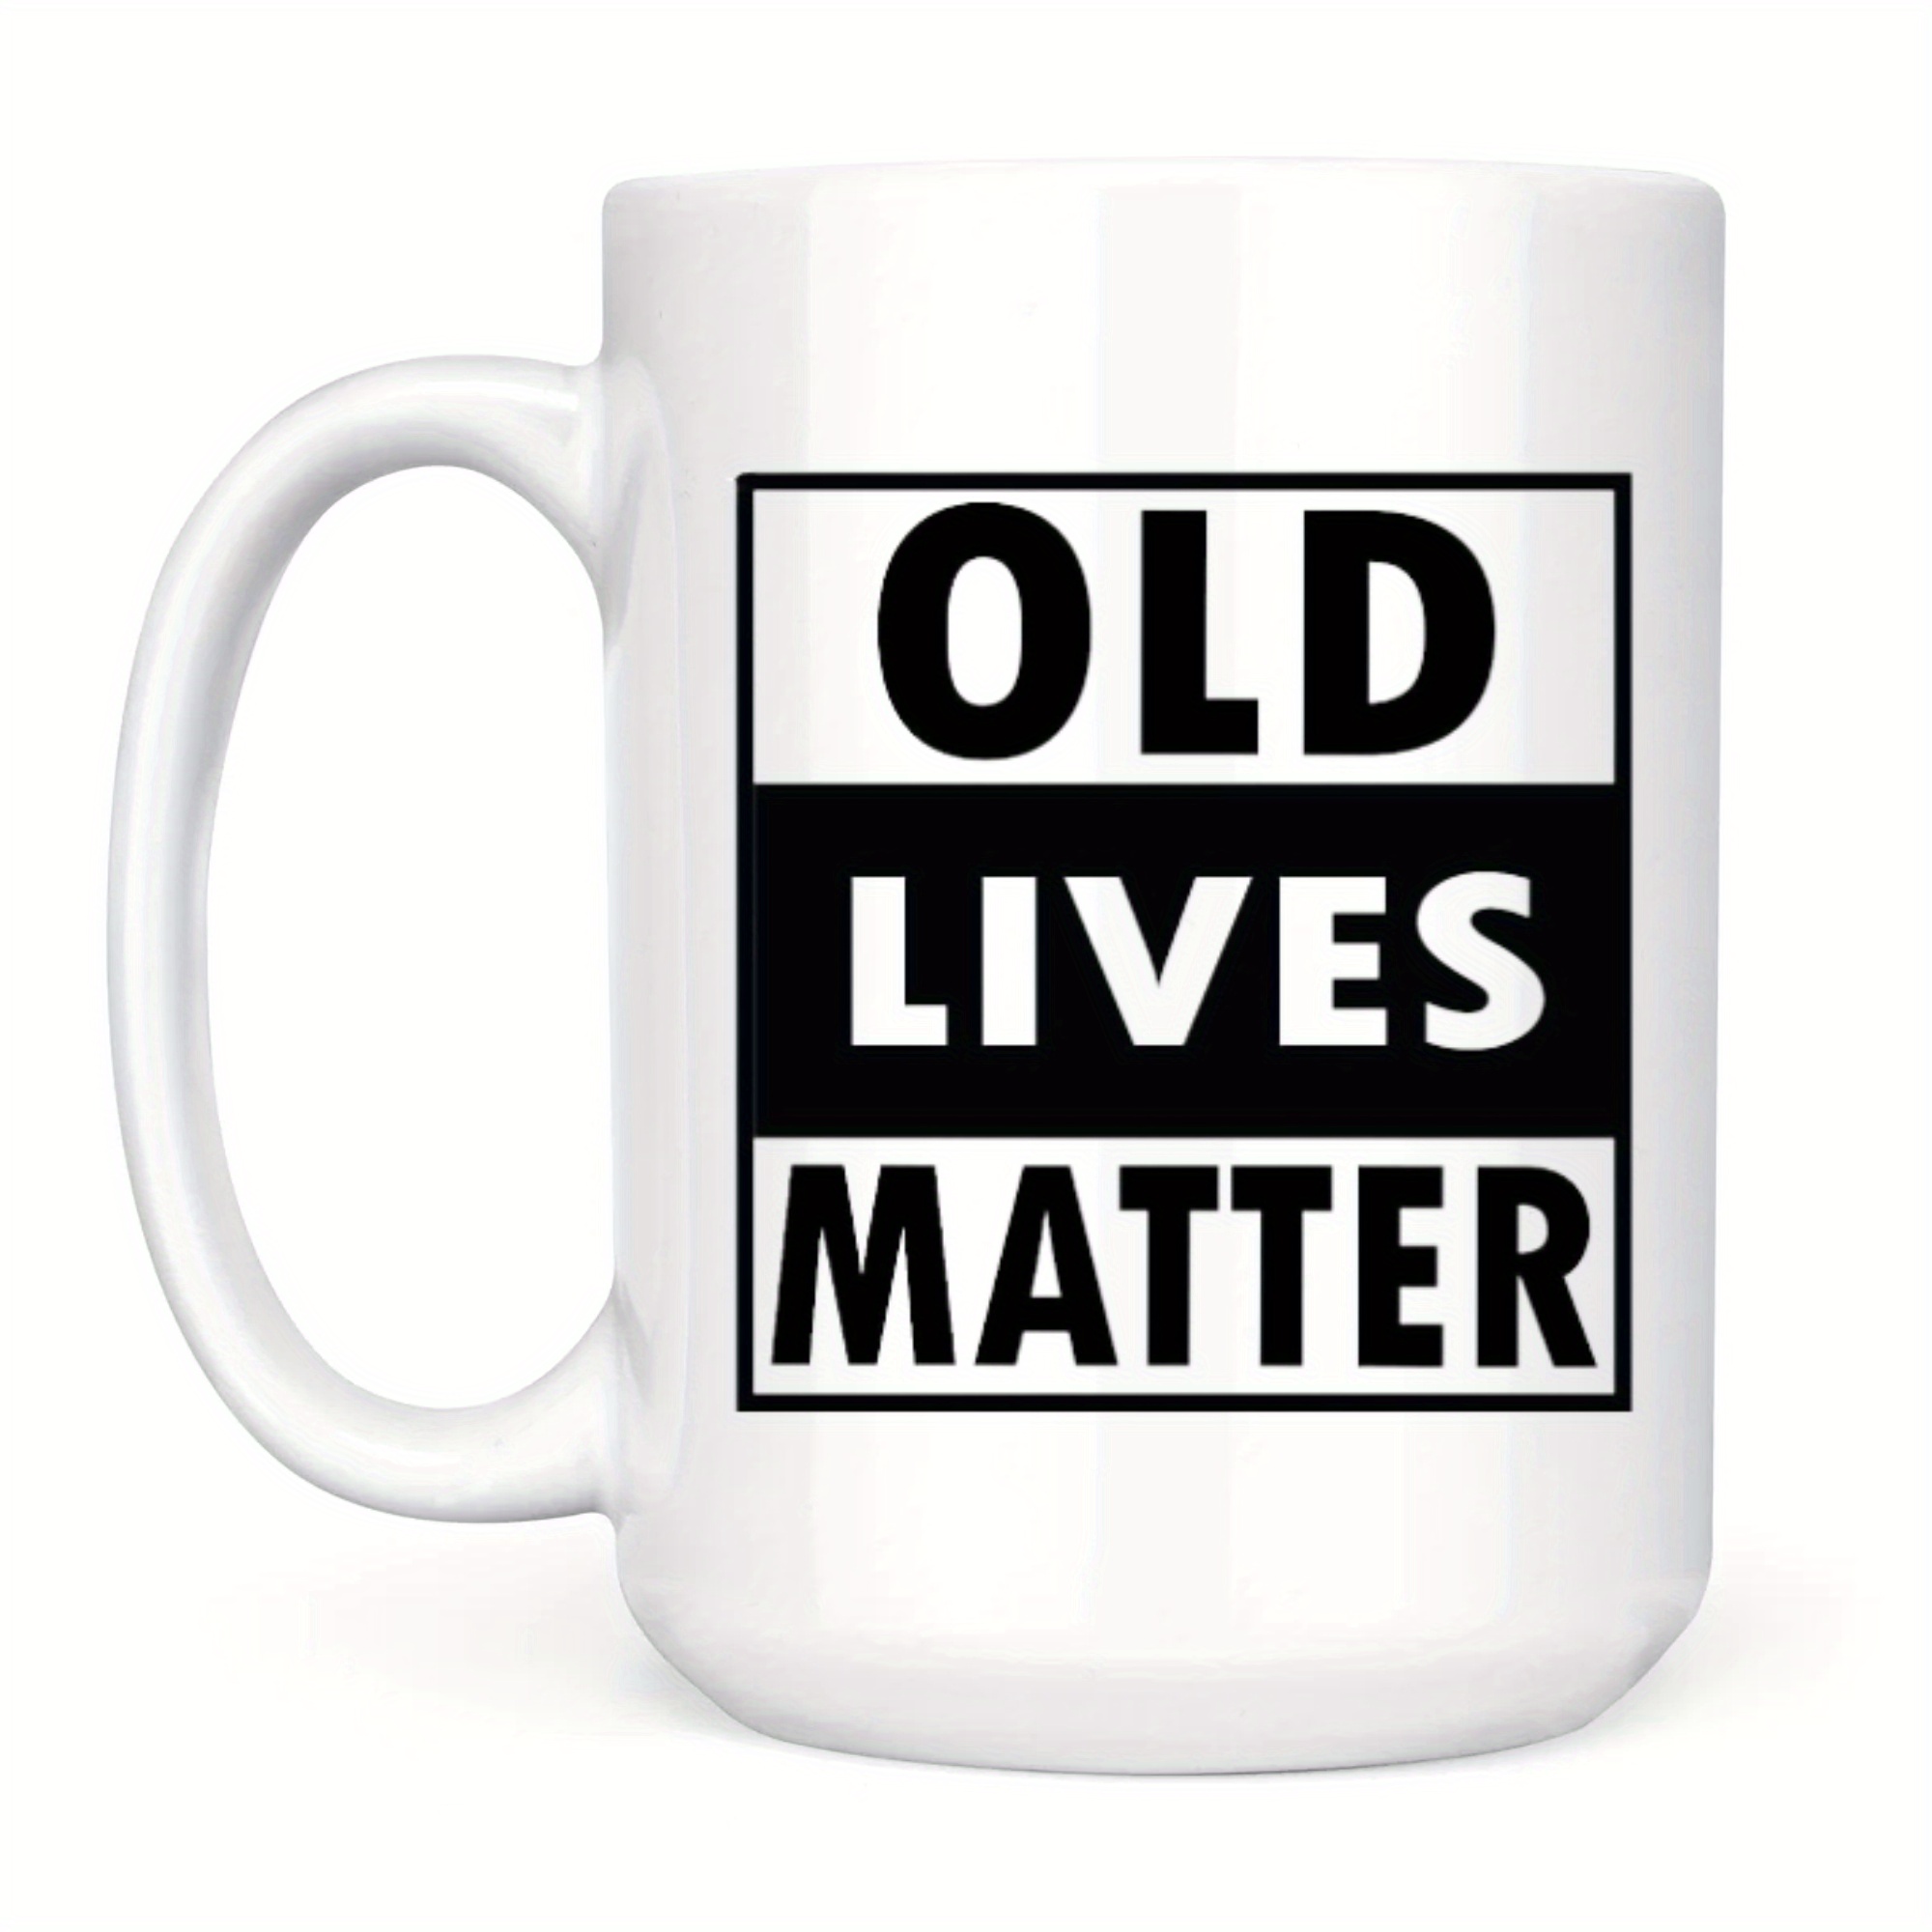 Personalized mugs for Mom, Dad, Grandma or Grandpa with funny